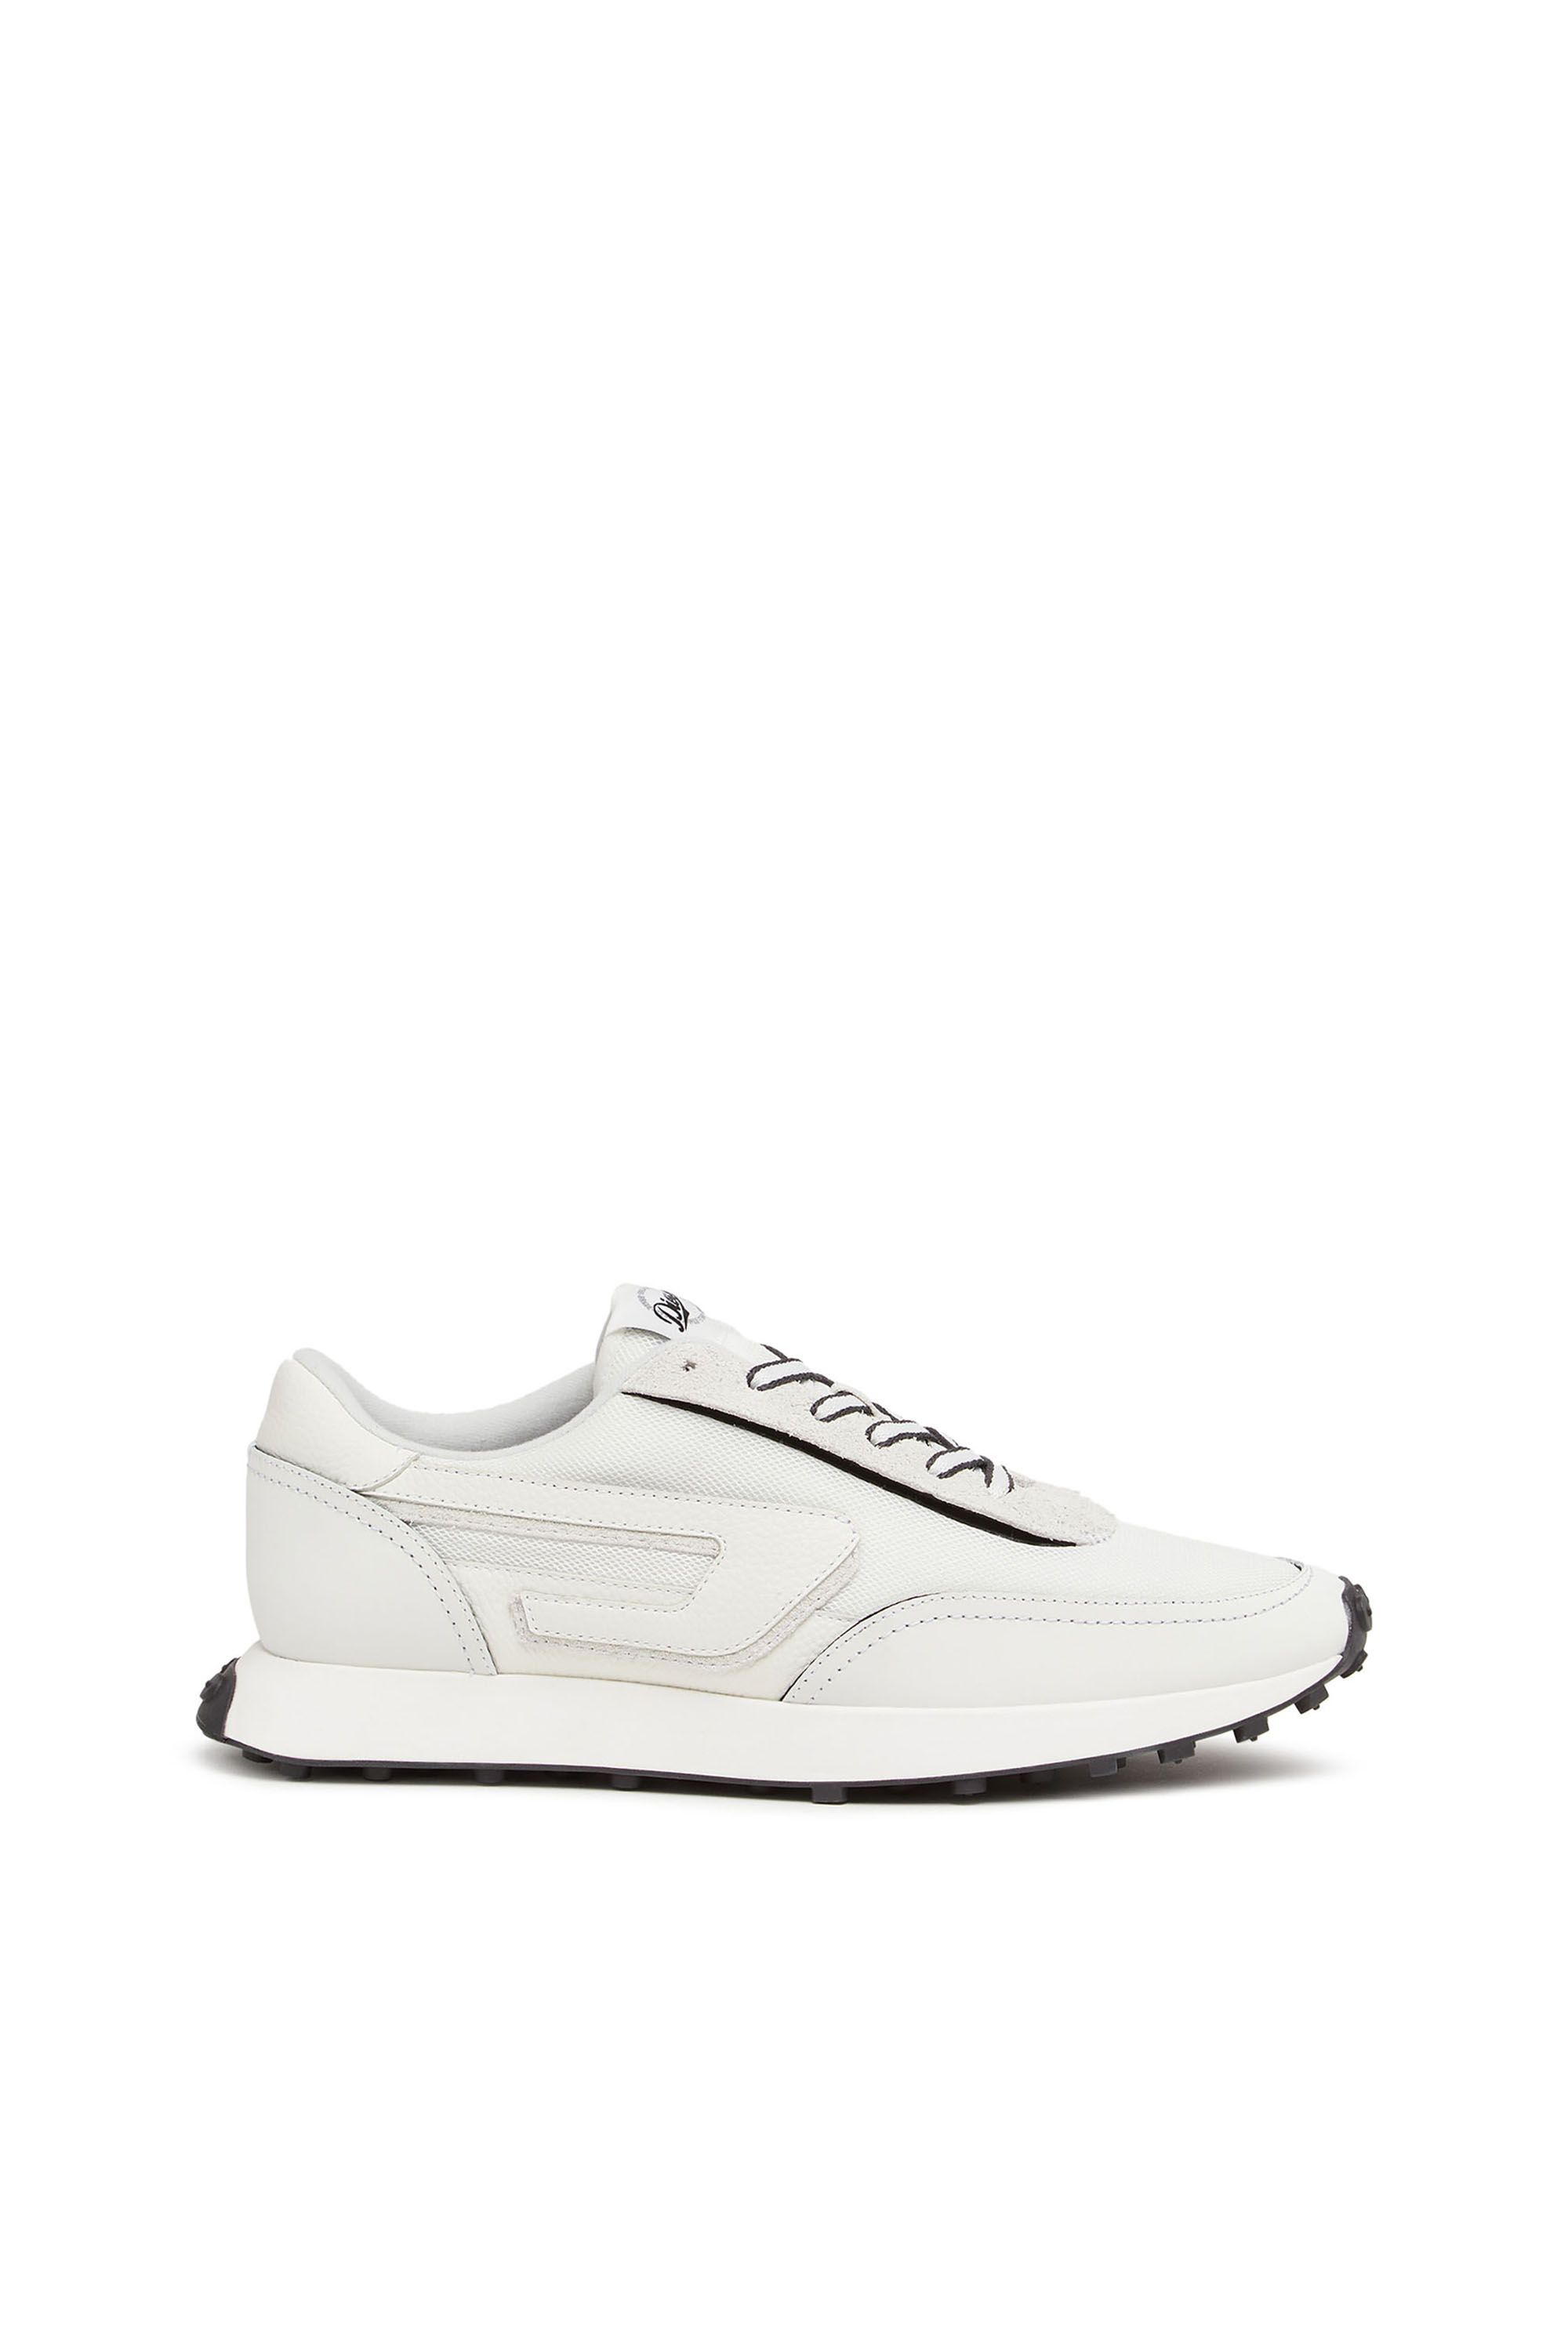 Diesel - S-Racer Lc - Sneakers in mesh, suede and leather - Sneakers - Man - White